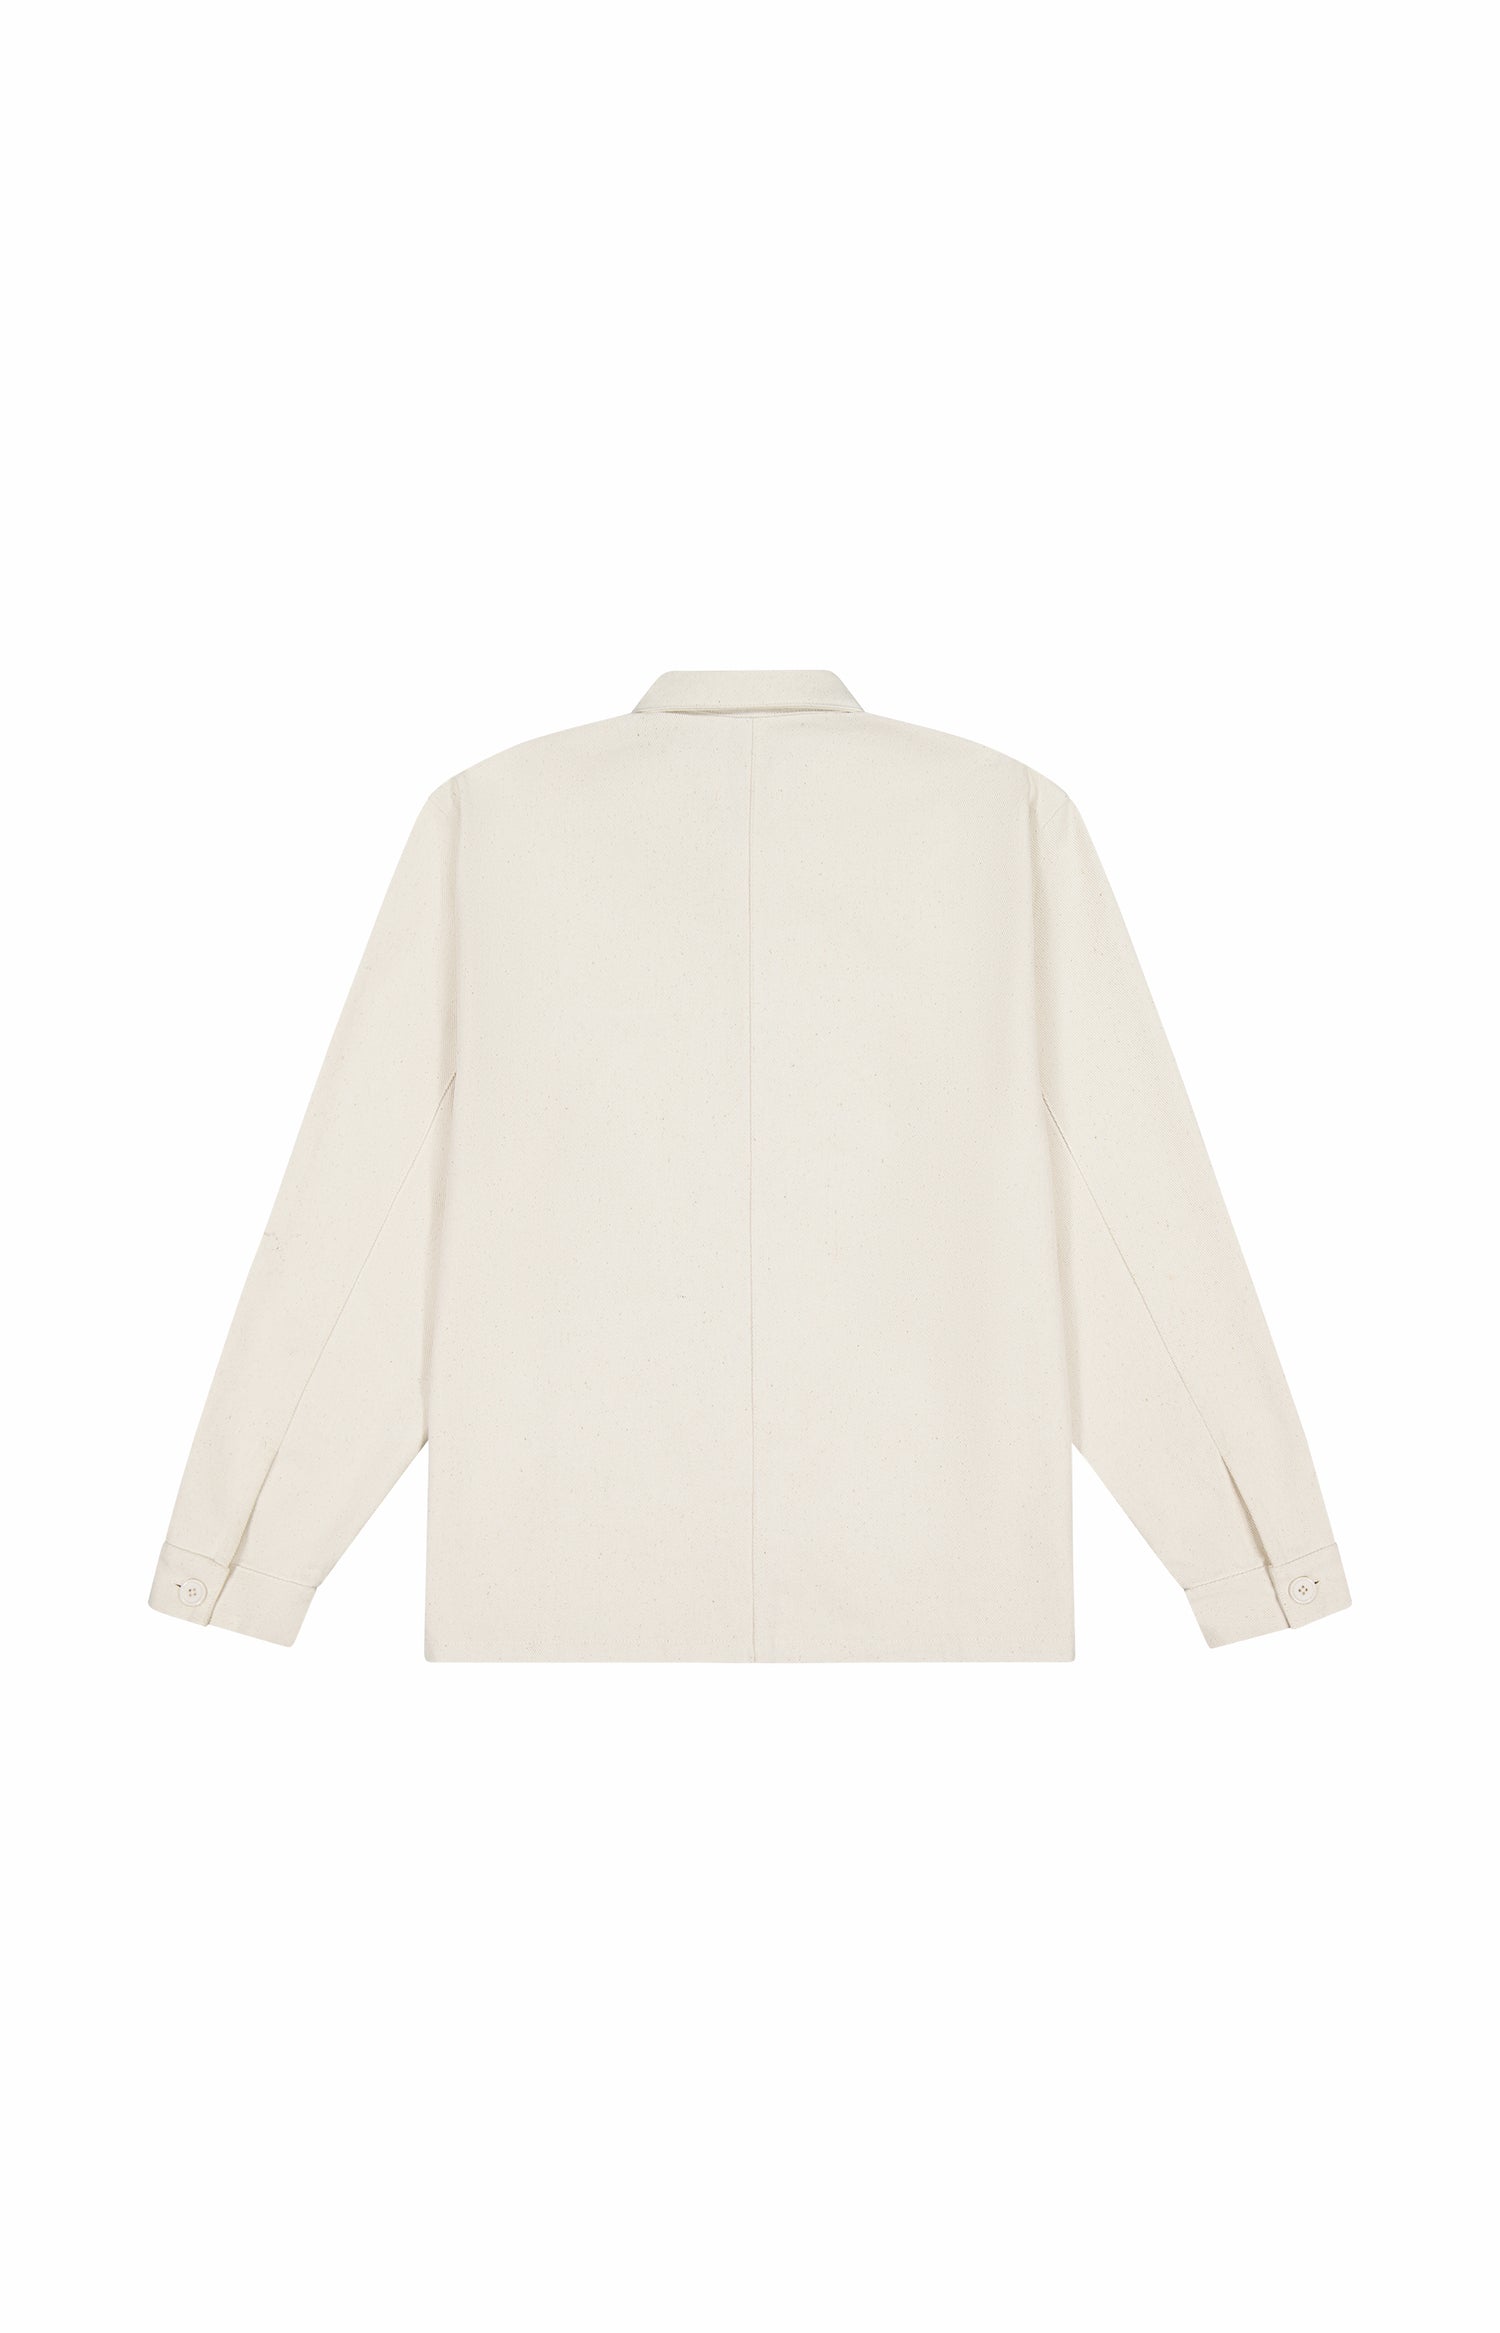 back view of a long sleeve off-white collared jacket